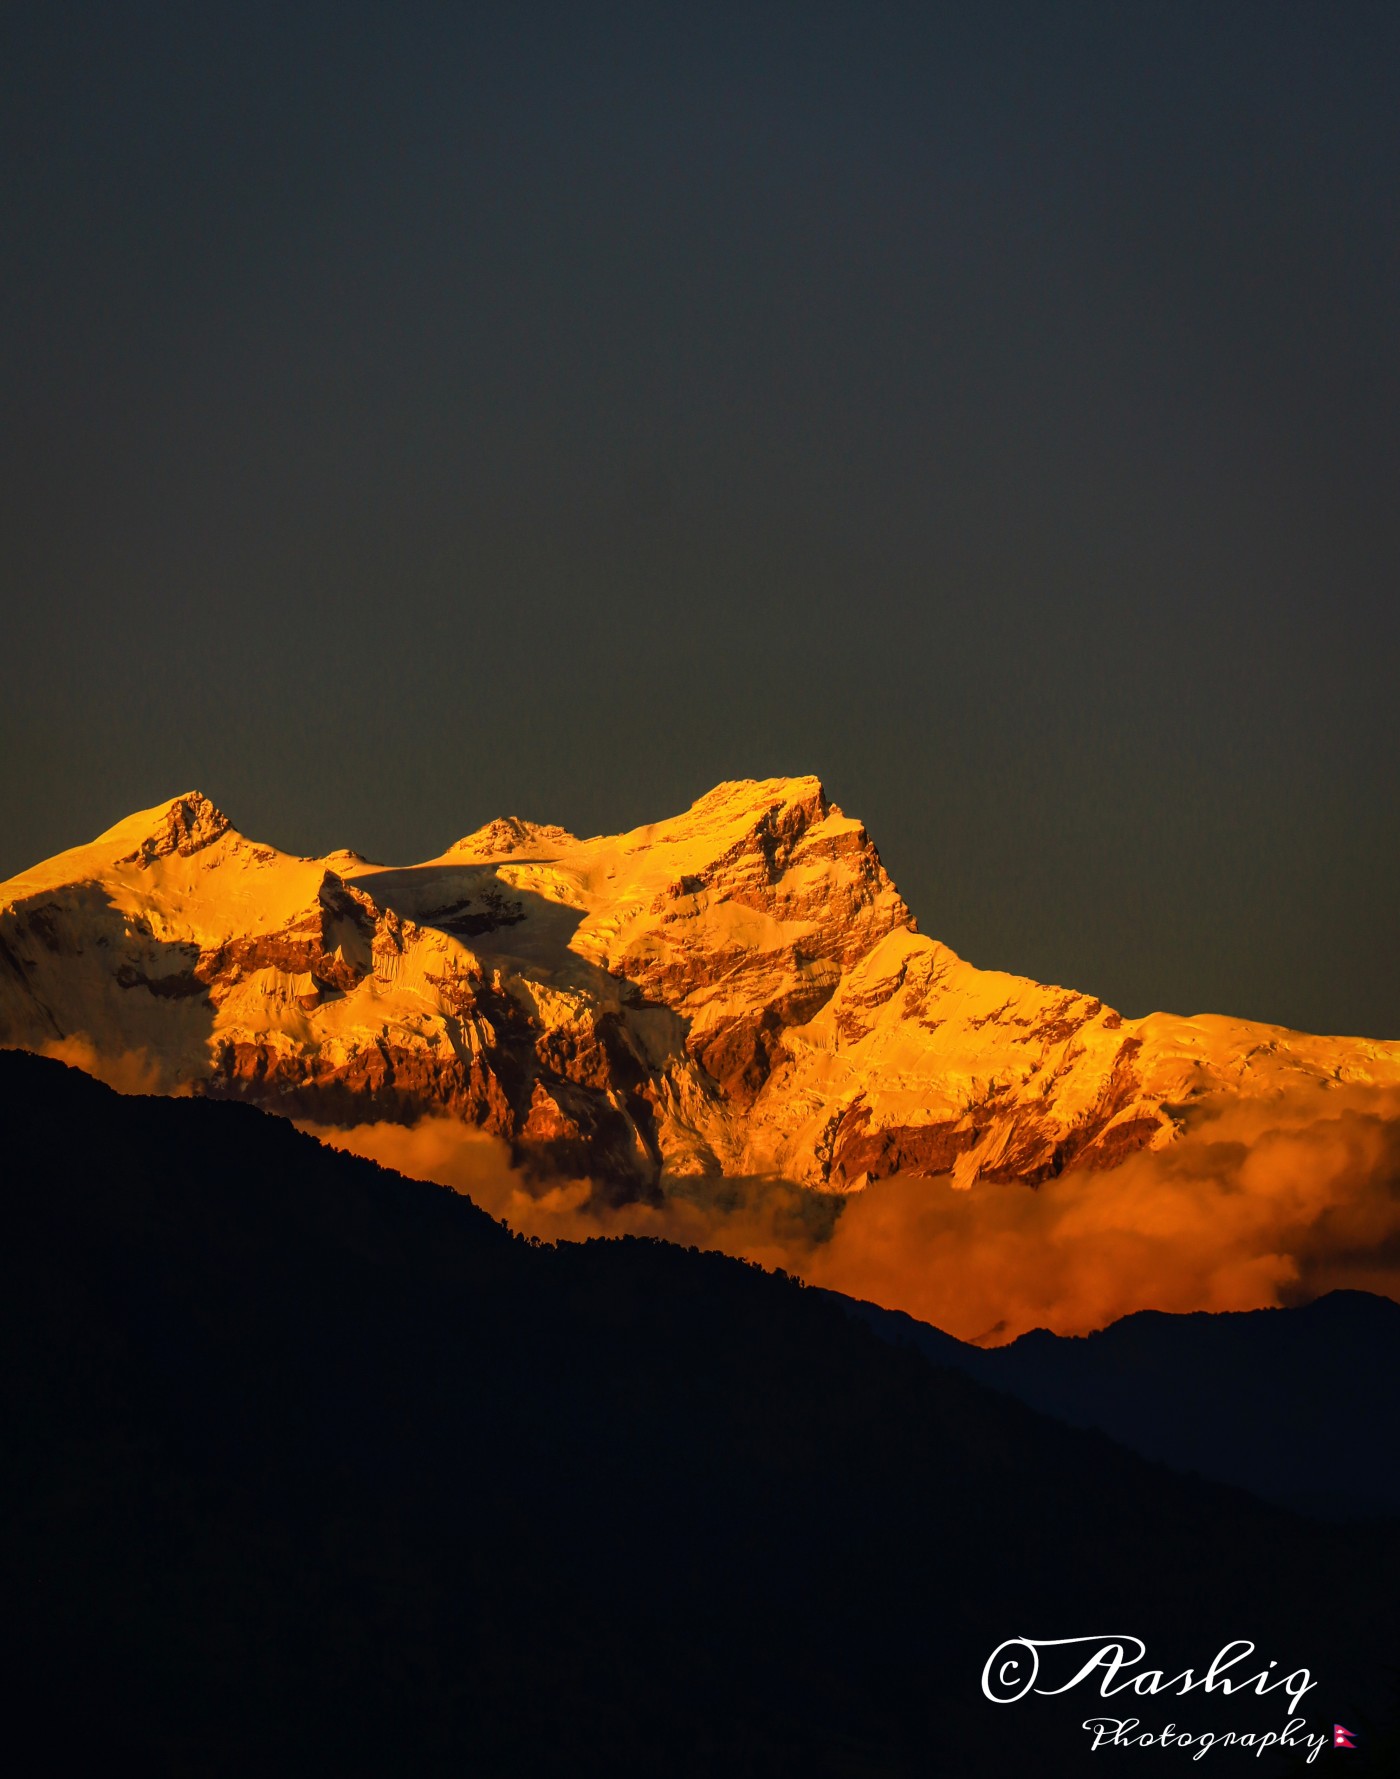 Golden hour: Majestic evening view of Mt. Himalchuli as seen from Palungtar, Gorkha.